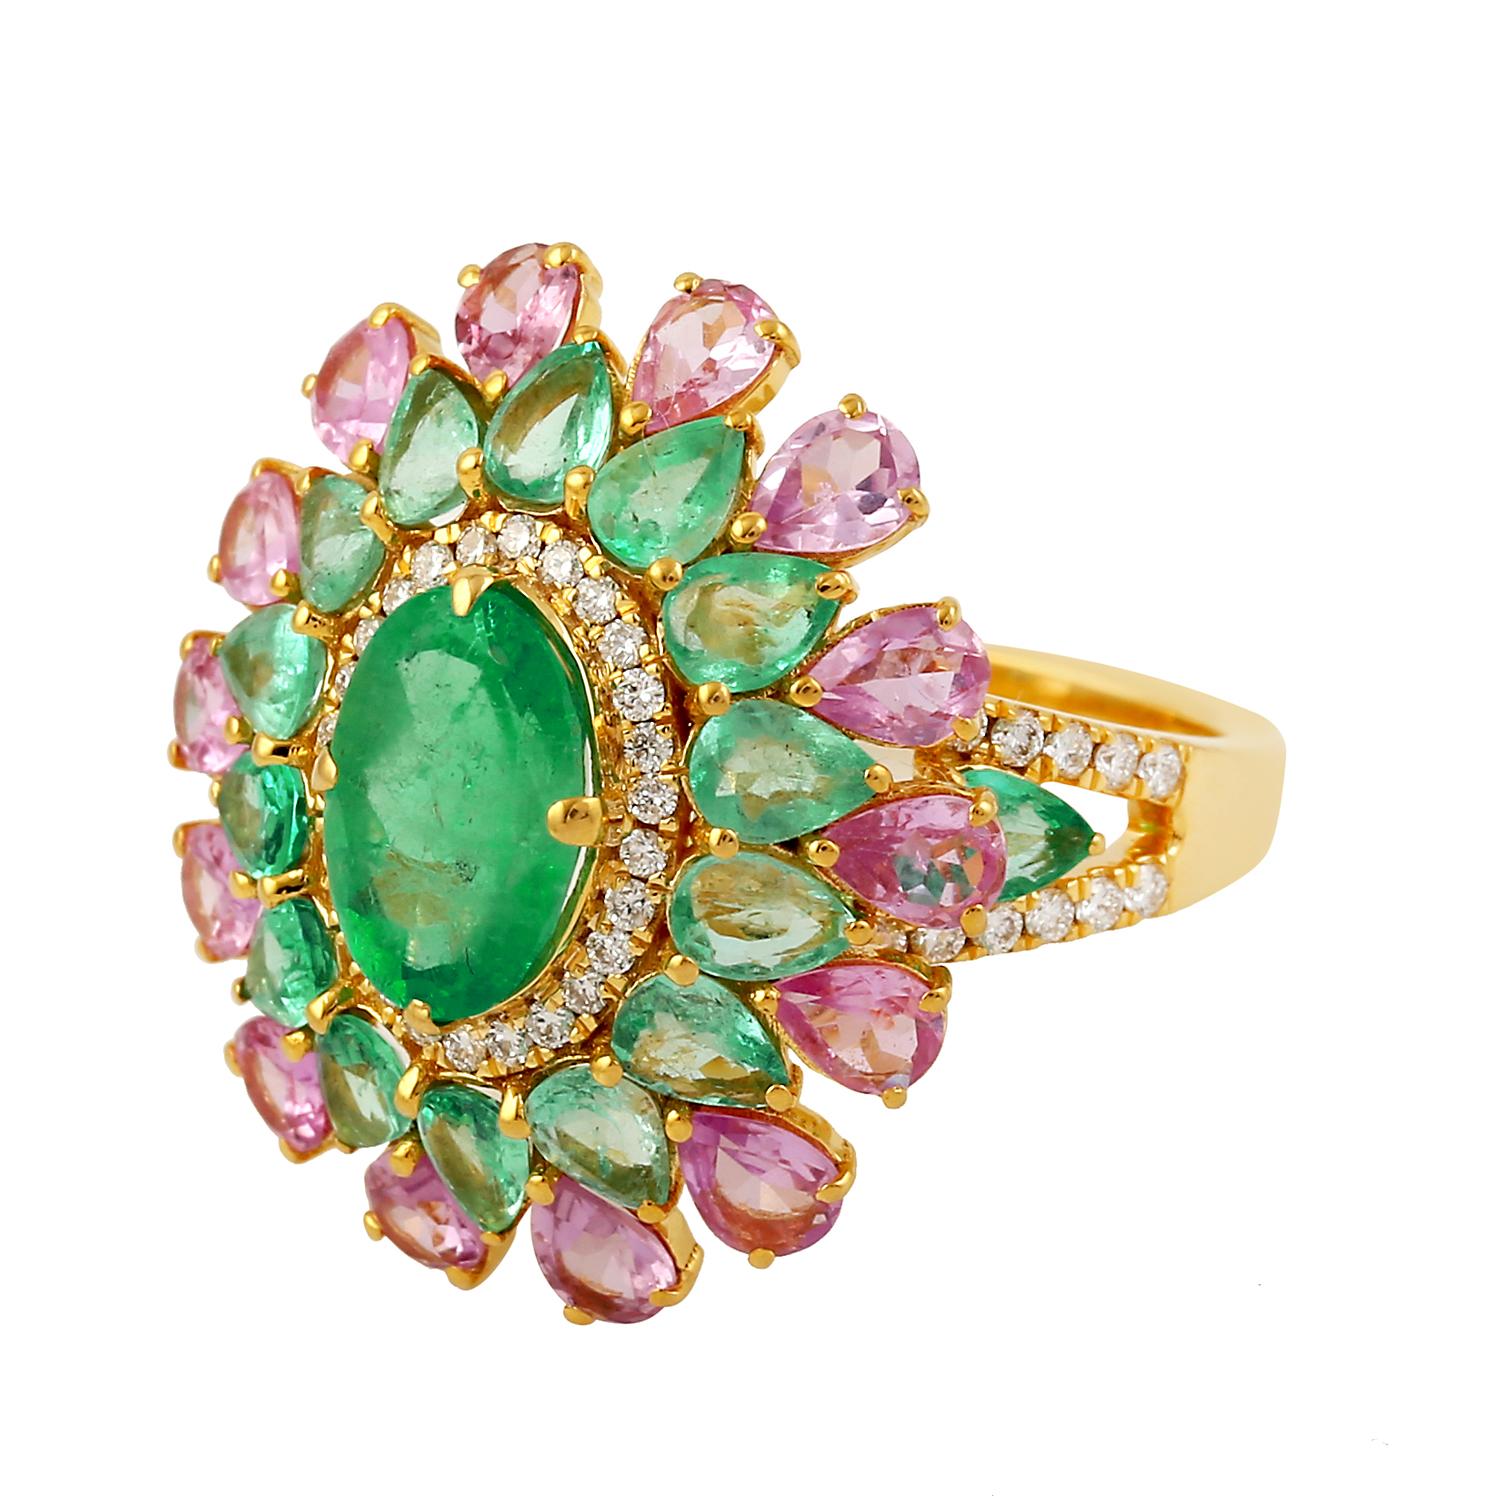 This ring has been meticulously crafted from 14-karat gold.  It is hand set with 3.56 carats emerald, 2.14 carats pink sapphire & .36 carats of sparkling diamonds. 

The ring is a size 7 and may be resized to larger or smaller upon request. 
FOLLOW 